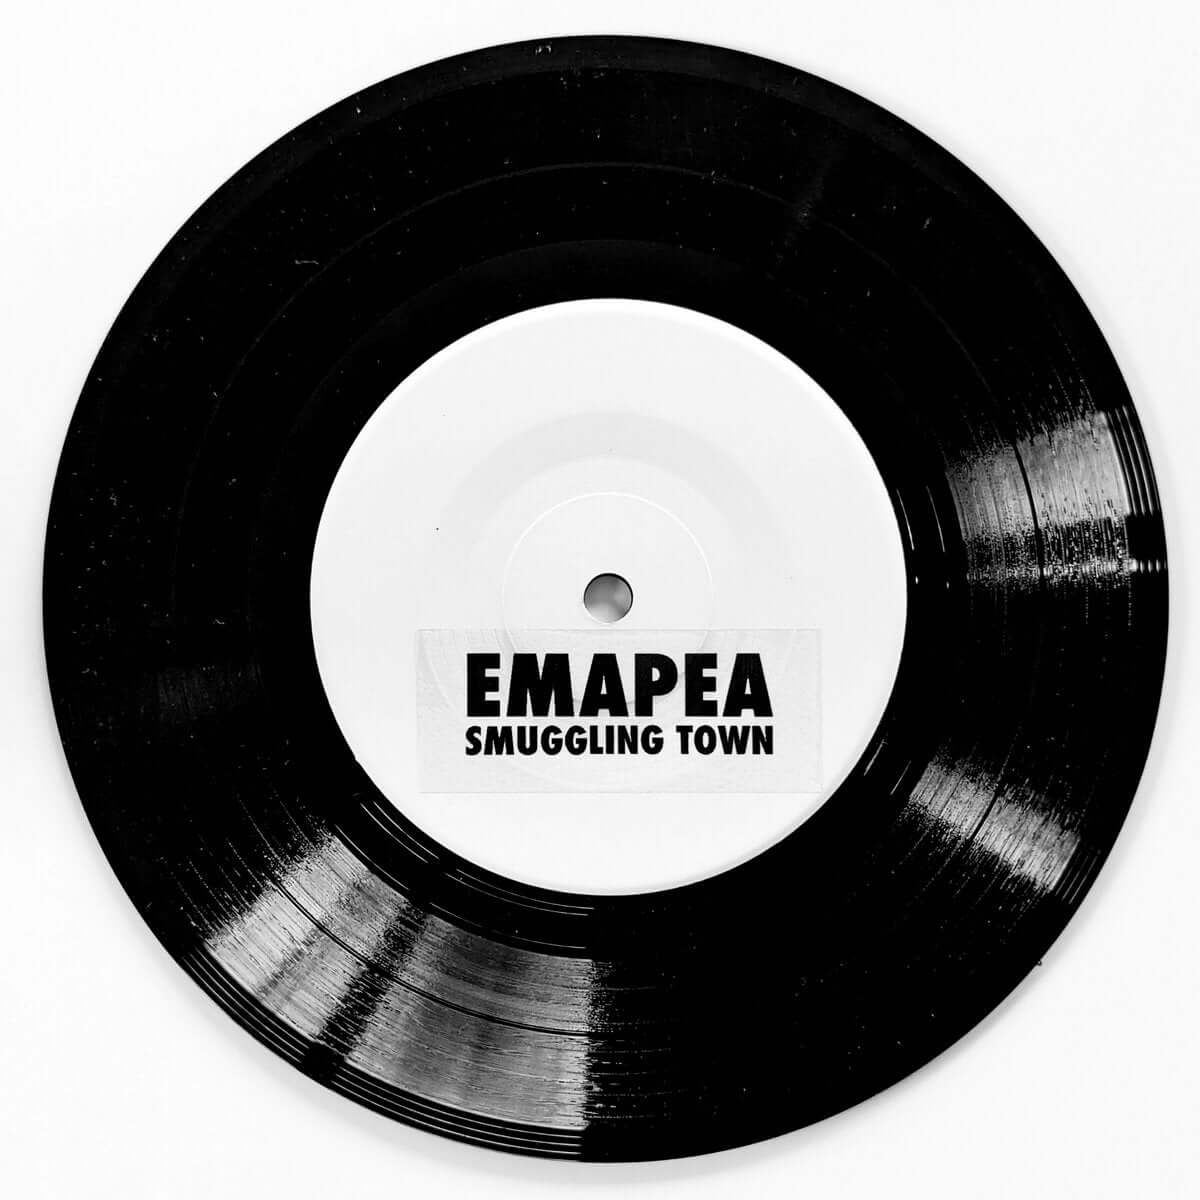 Emapea - Smuggling Town - Limited Edition 7 Inch Vinyl Test Pressing - Cold Busted